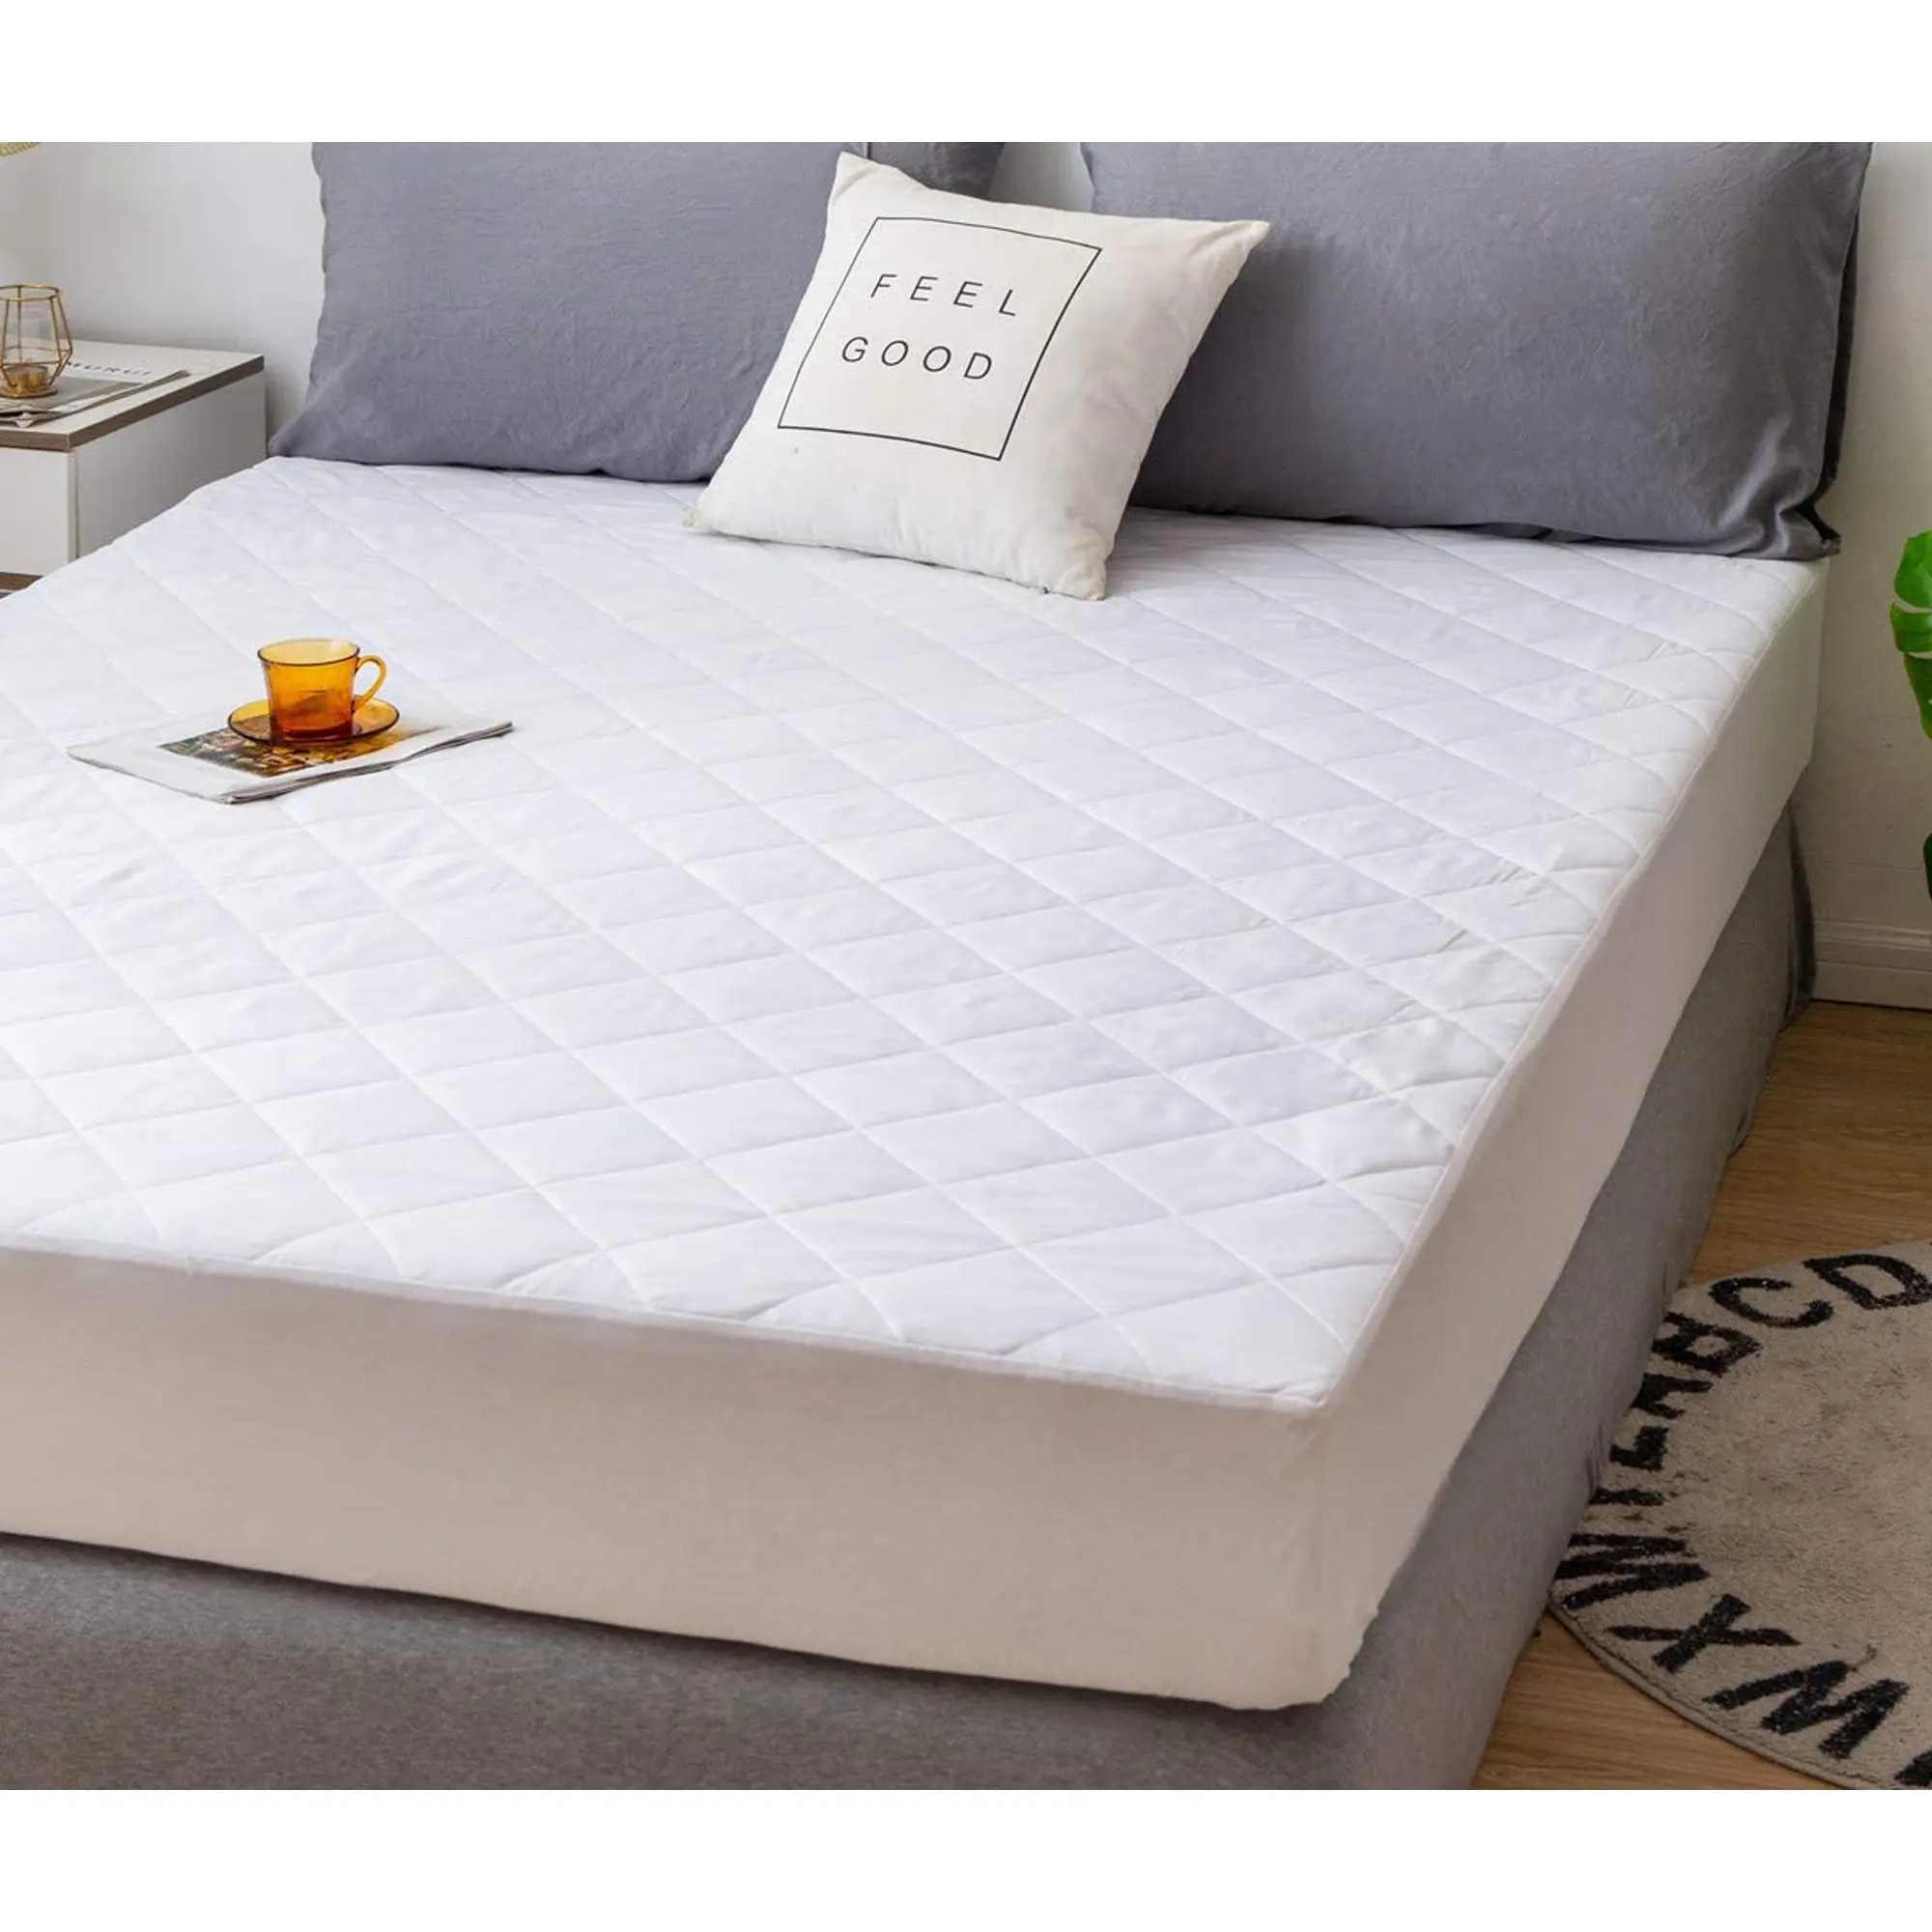 Mattress Protector for Bedwetters Fitted Sheet Style Soft 100% Waterproof 